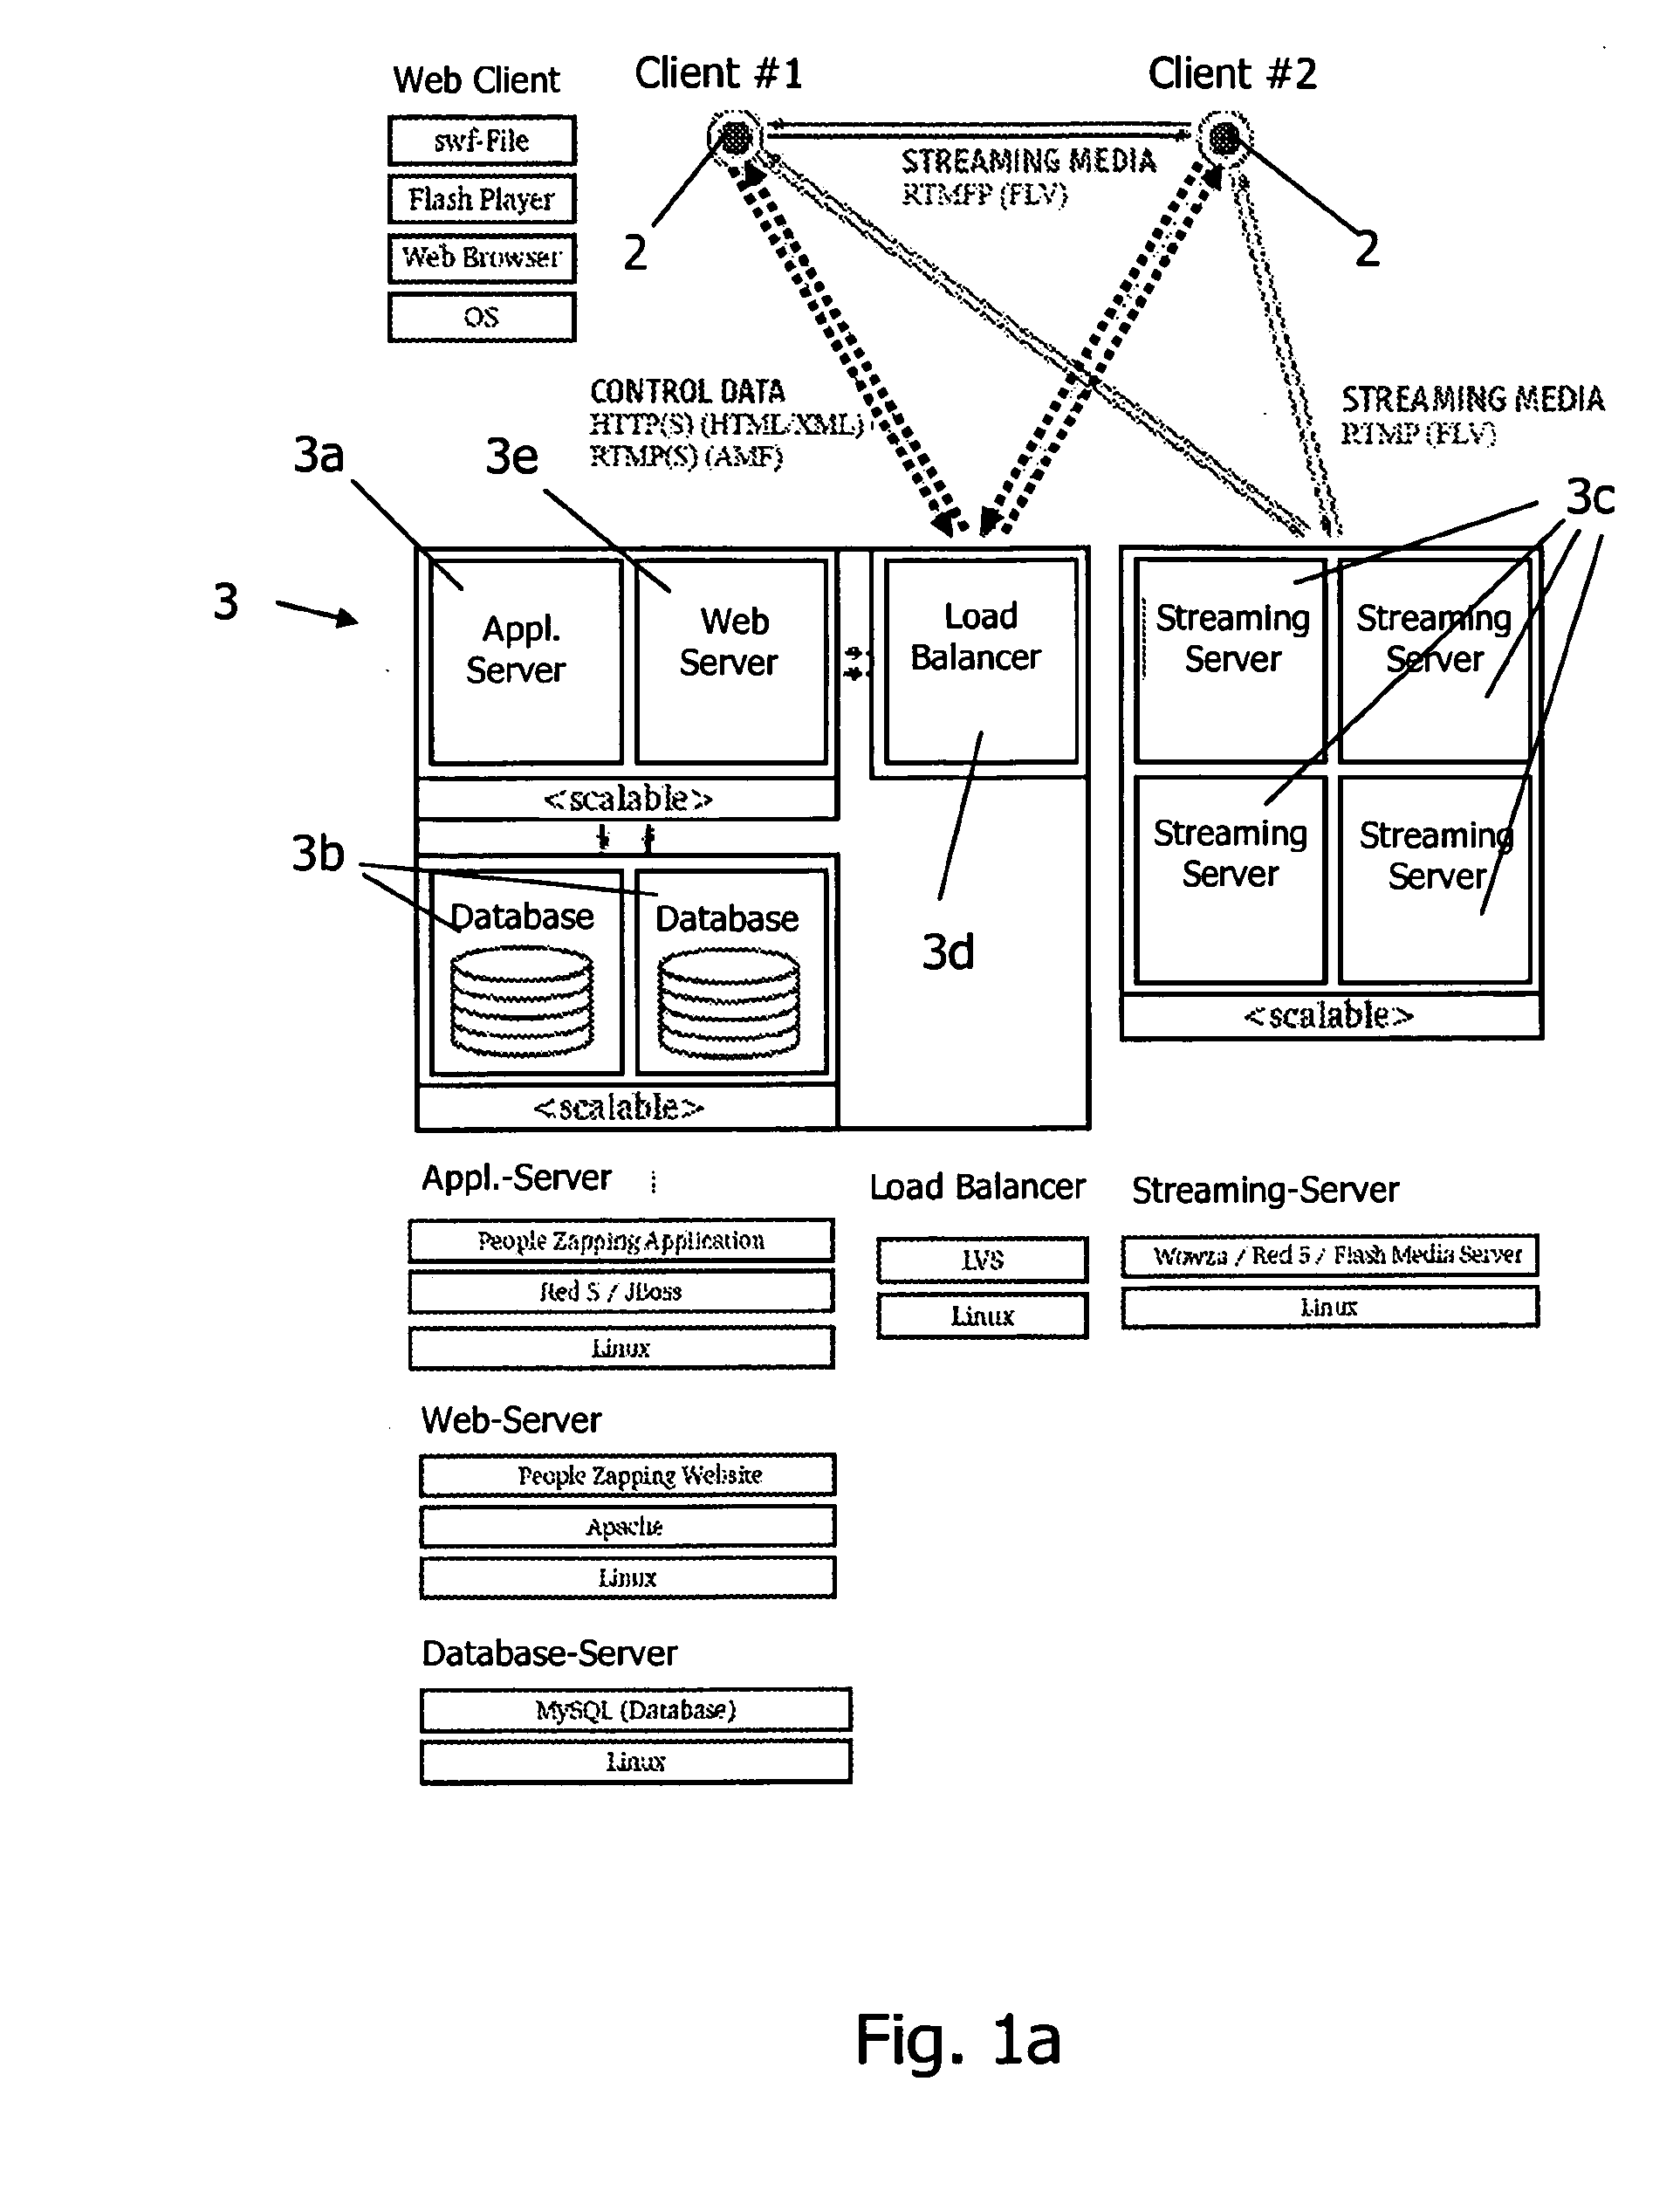 Method for Carrying Out a Multimedia Communication Based on a Network Protocol, Particularly TCP/IP and/or UDP